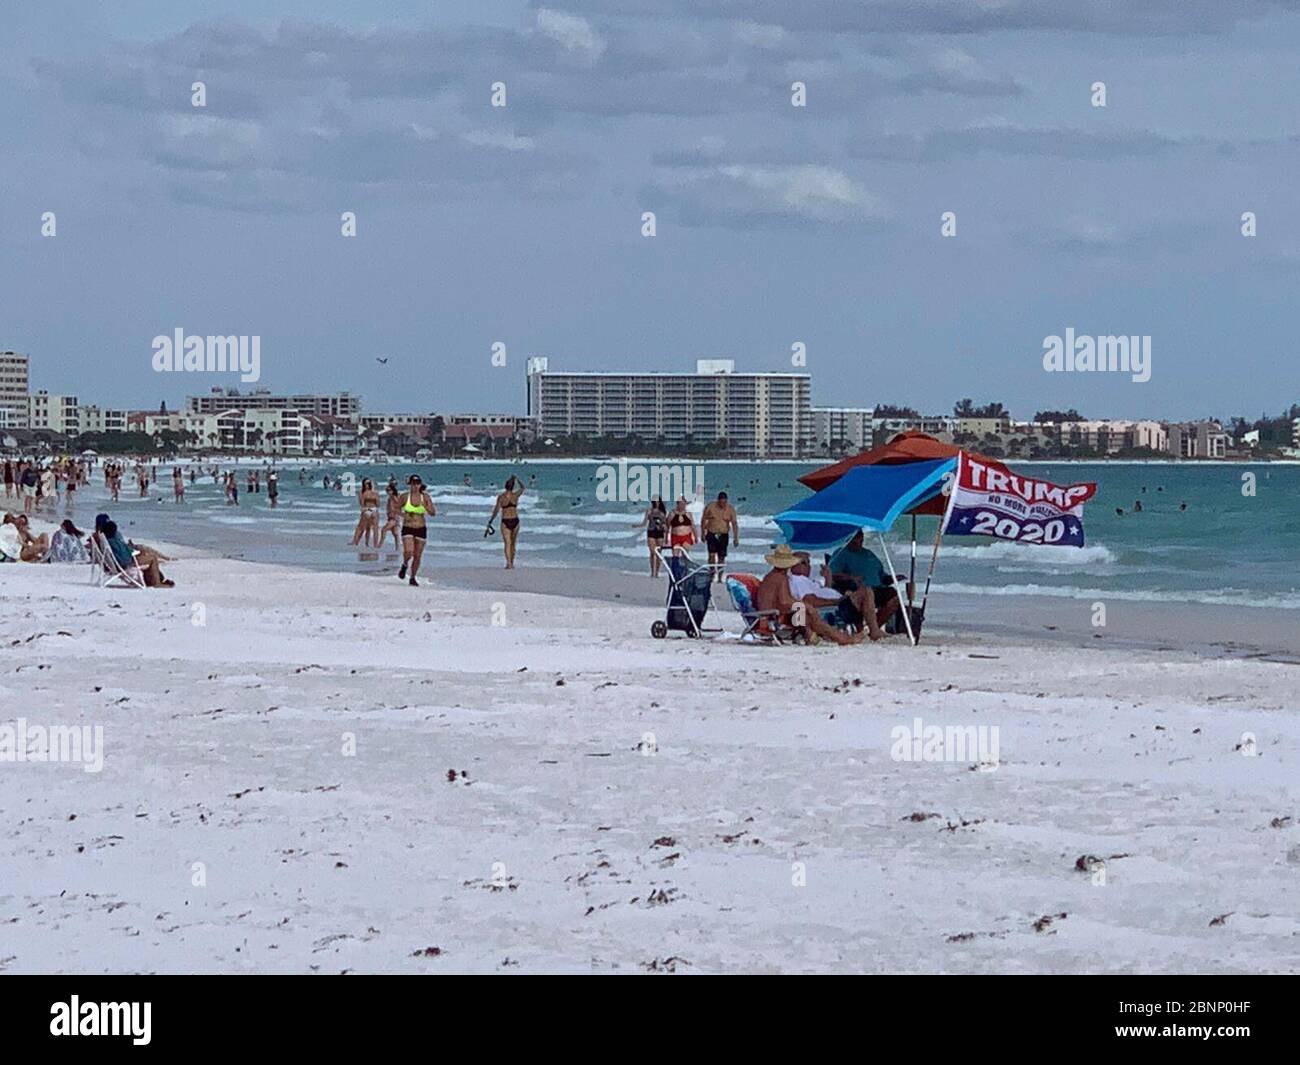 Trump supporters display a 2020 flag at the beach as Sarasota County lifted its restrictions at popular beaches such as Siesta Key. Stock Photo